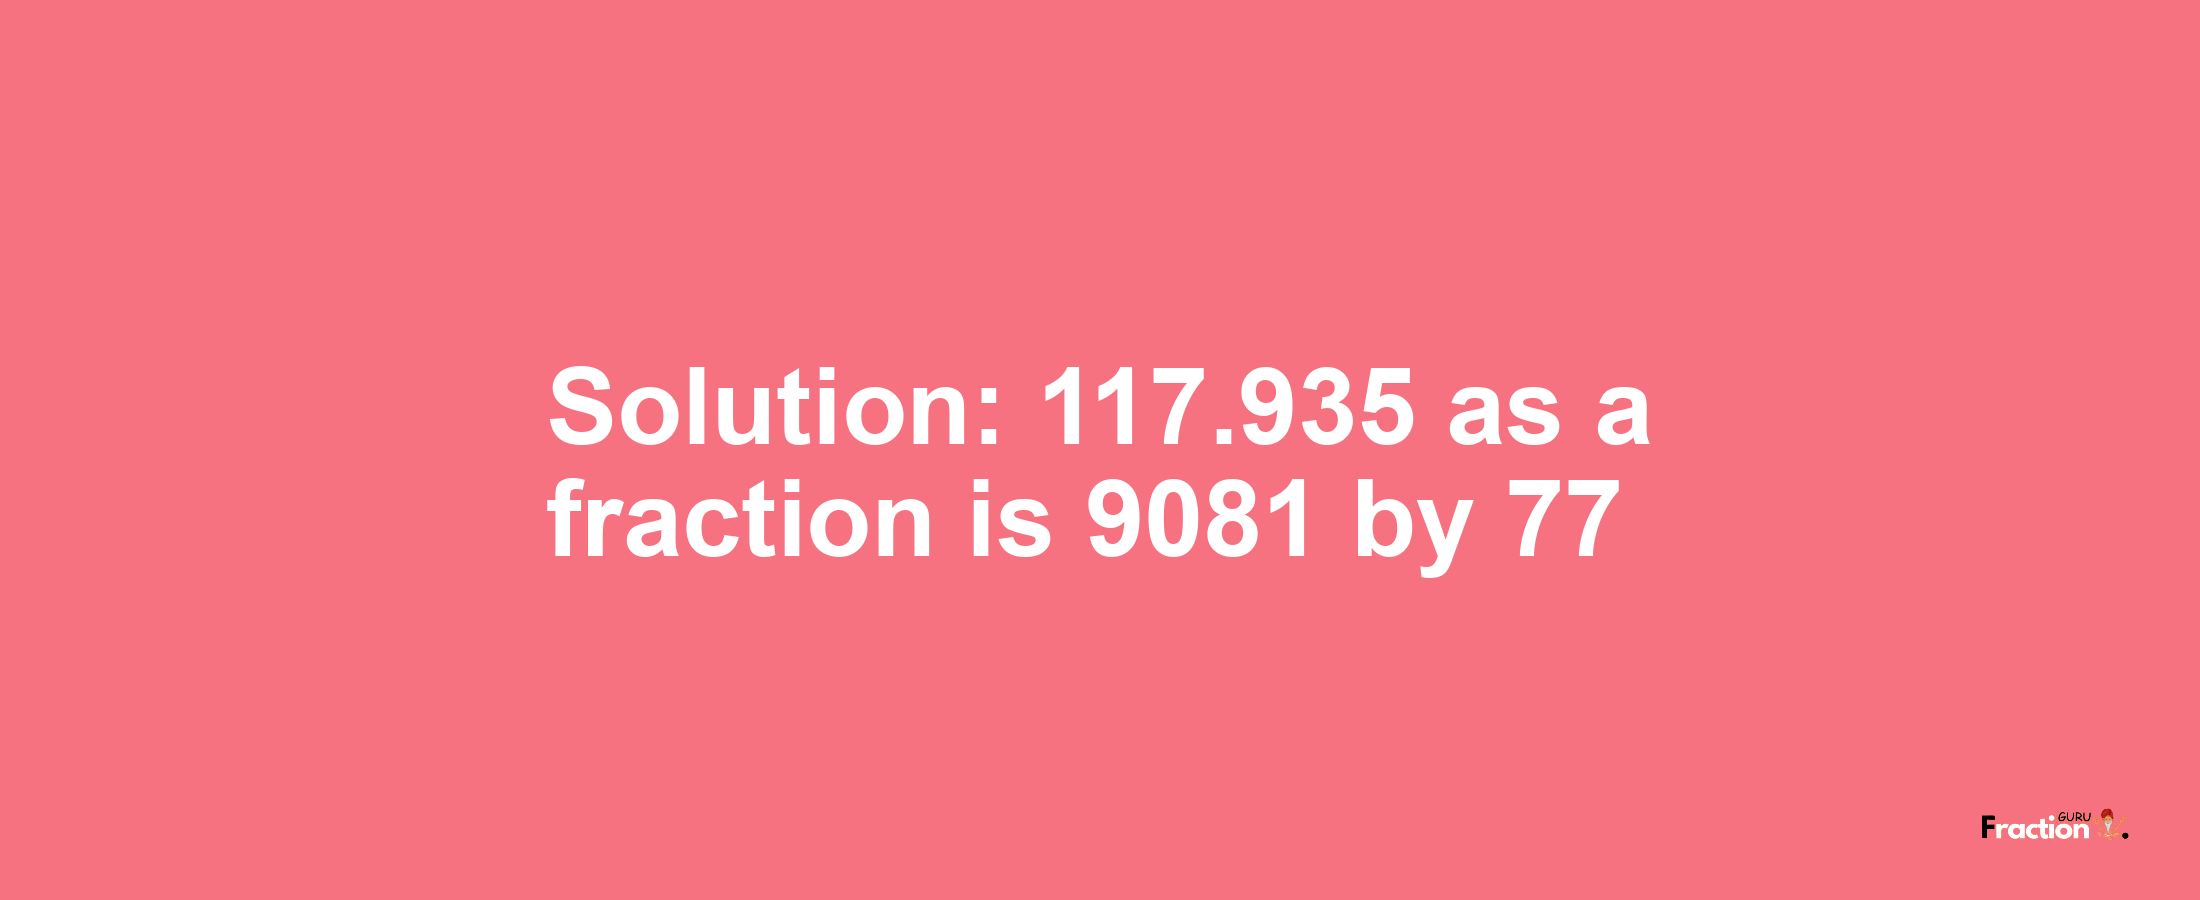 Solution:117.935 as a fraction is 9081/77